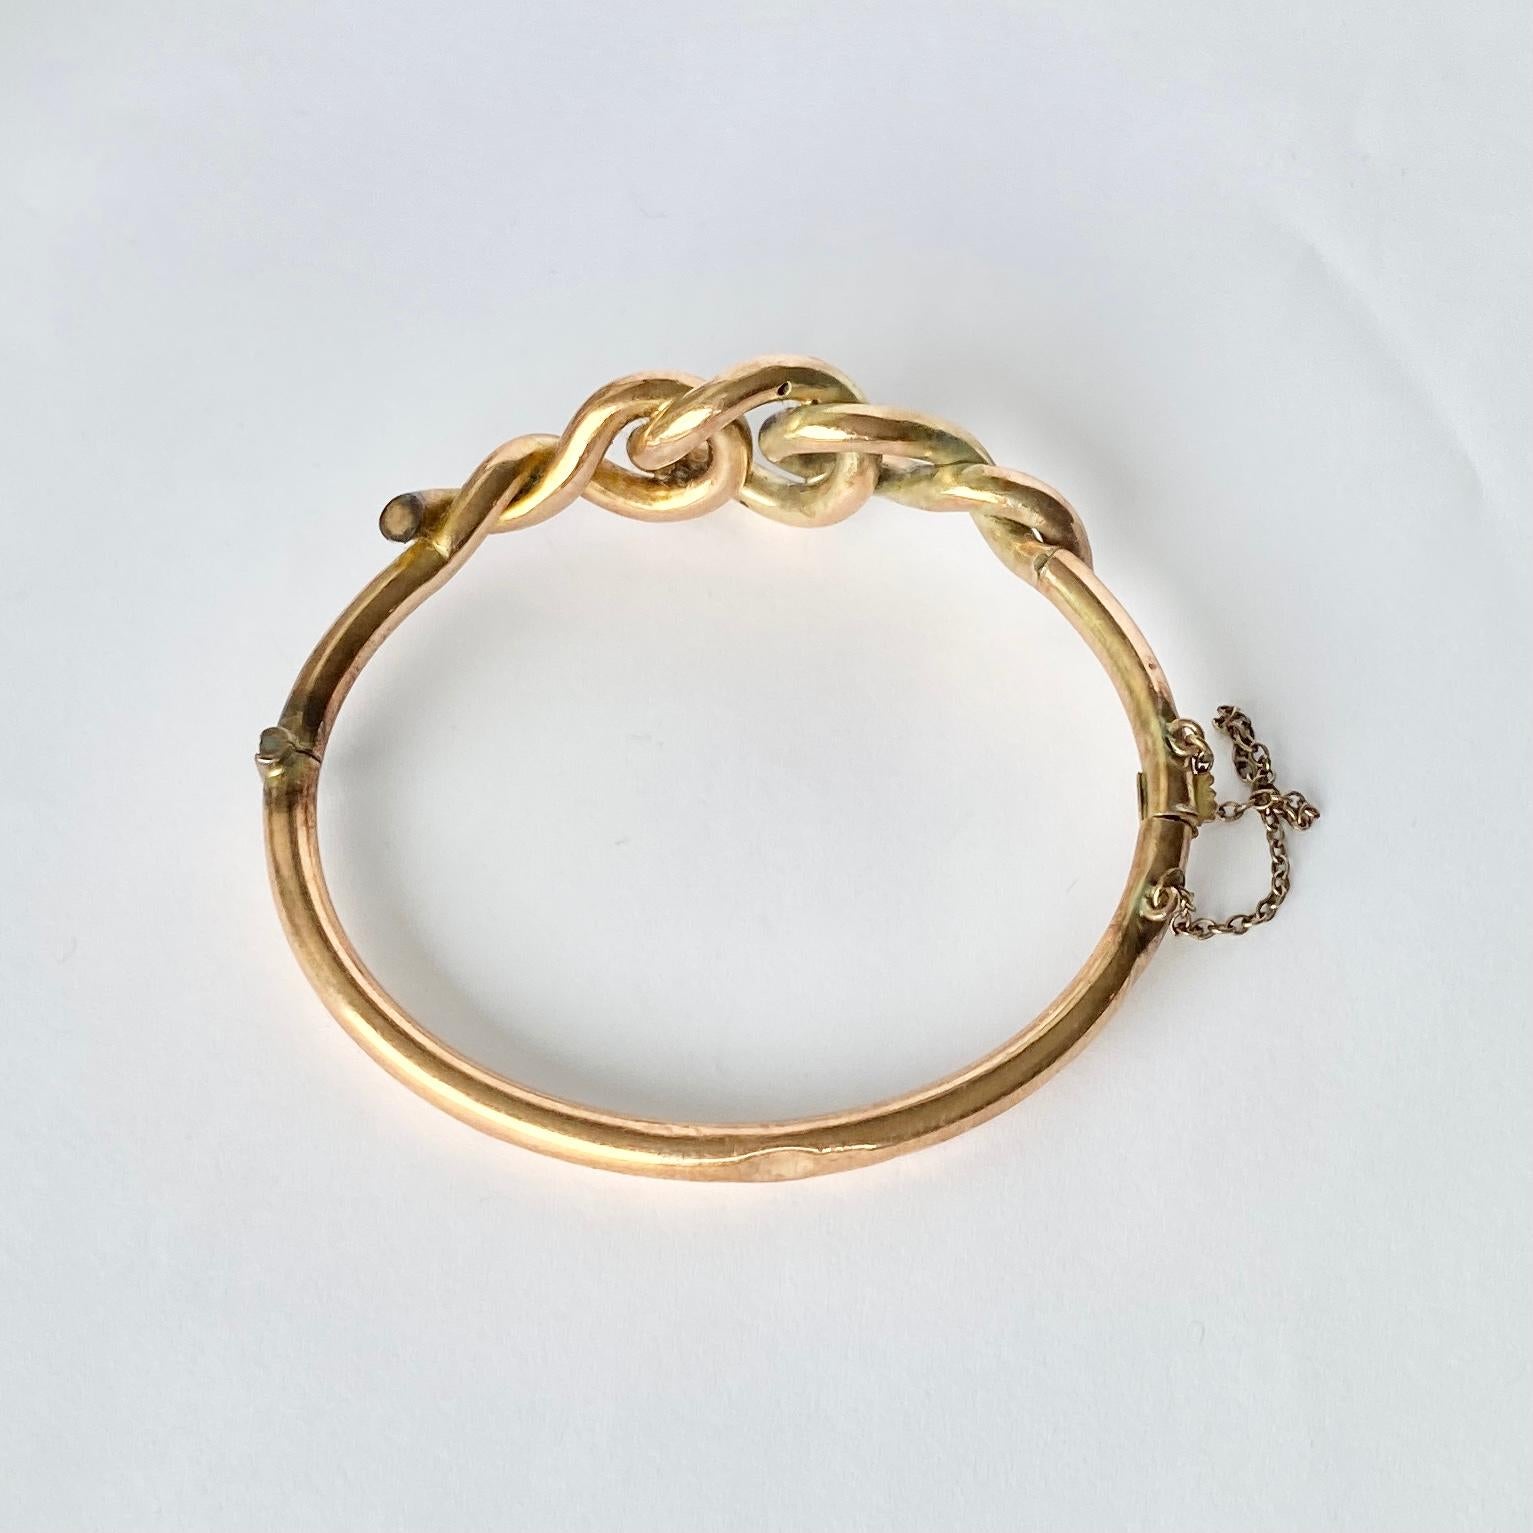 This gorgeous 9carat gold bangle has the intertwining lovers knot as the main detail. The gold is glossy and smooth and the fastening has a safety chain. 

Inner diameter: 58mm 
Width: 18mm

Weight: 10g